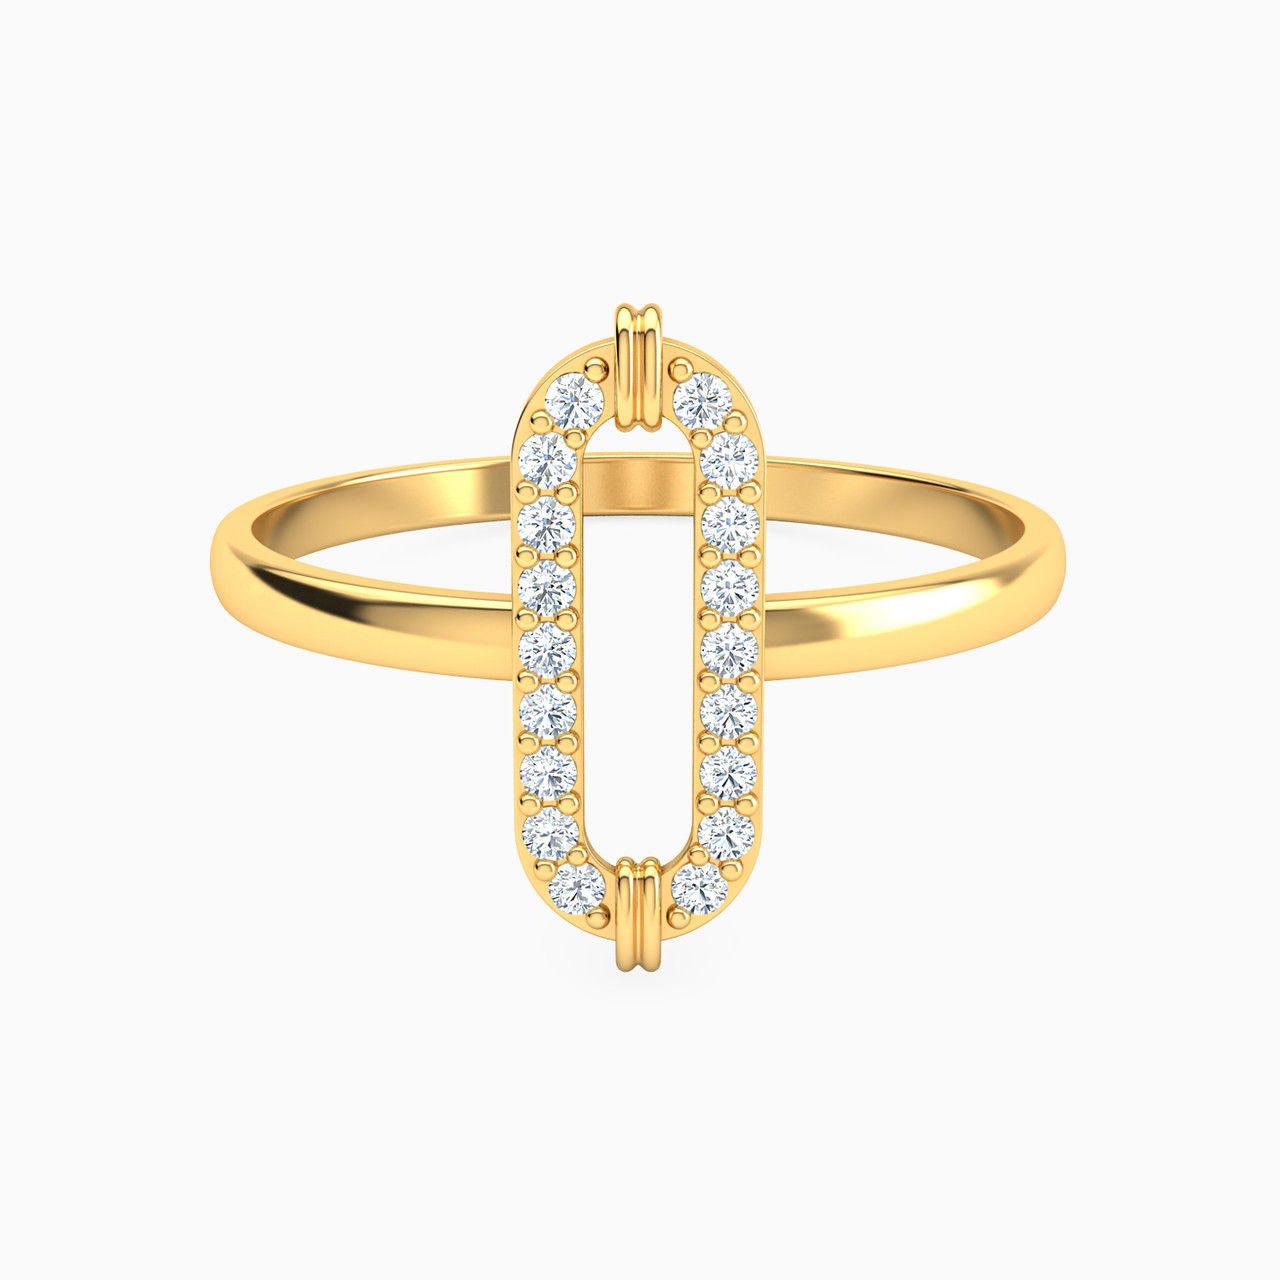 Oval Shaped Cubic Zirconia Statement Ring in 18K Gold